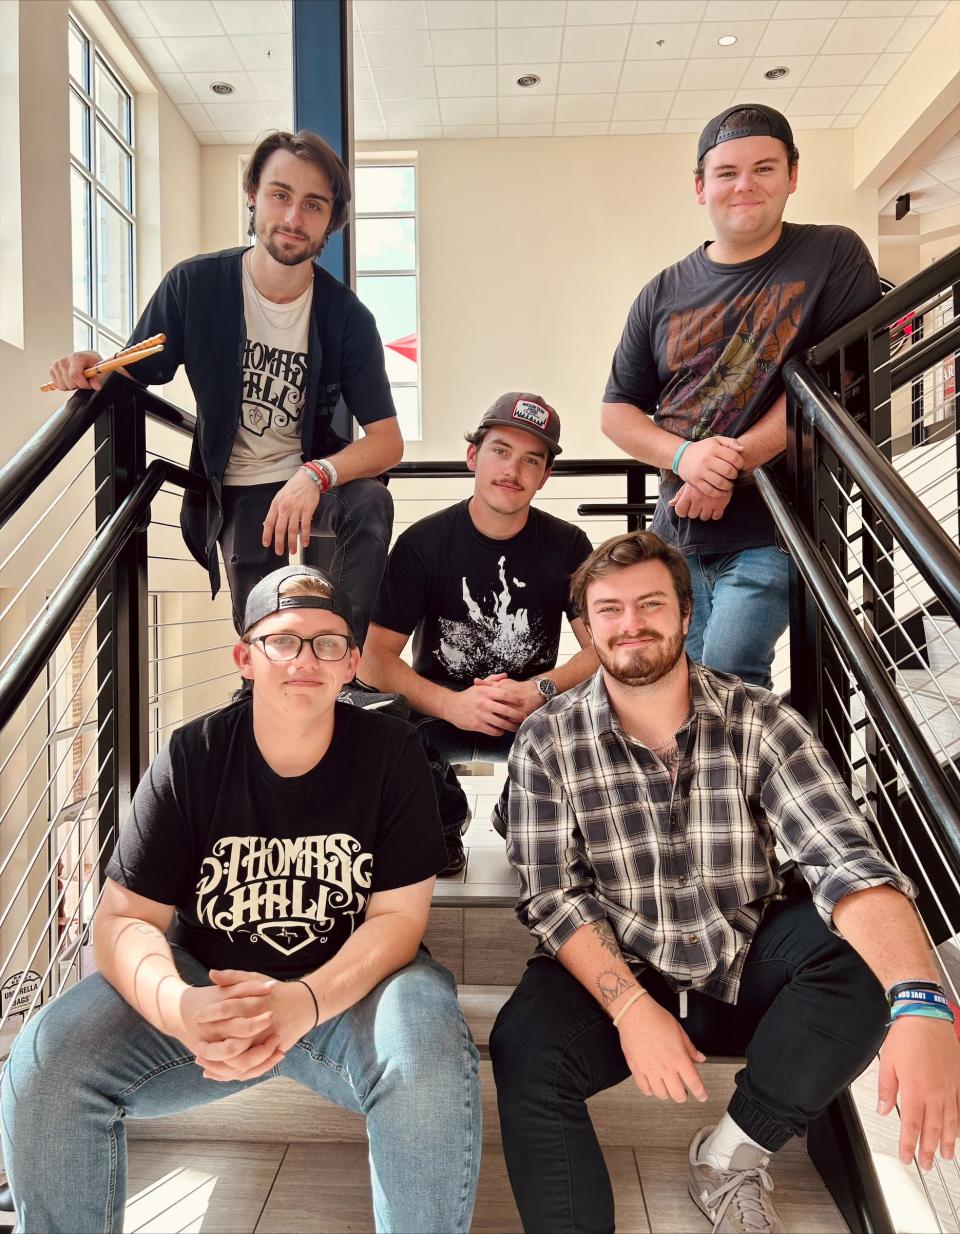 Thomas Hall, voted “Best Local Band,” will be among the musicians and vocalists who will perform beteween 5 p.m. and 8 p.m. Dec. 9, 2023, at William Carey University’s “Candlelit Christmas” at its Hattiesburg, Miss., campus.